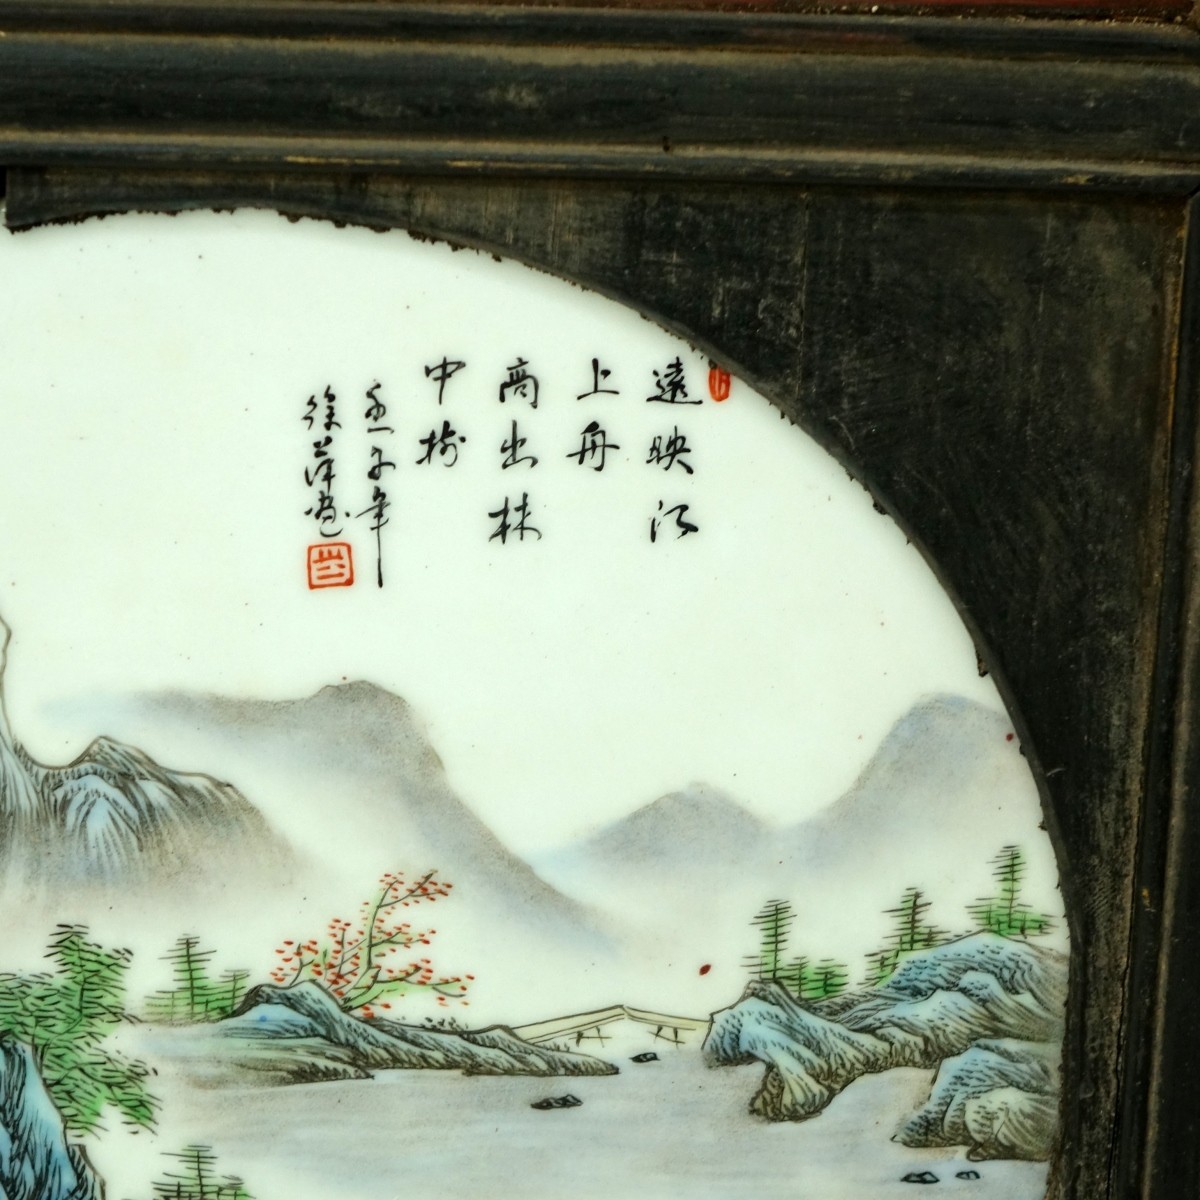 Four (4) Chinese Porcelain Plaques